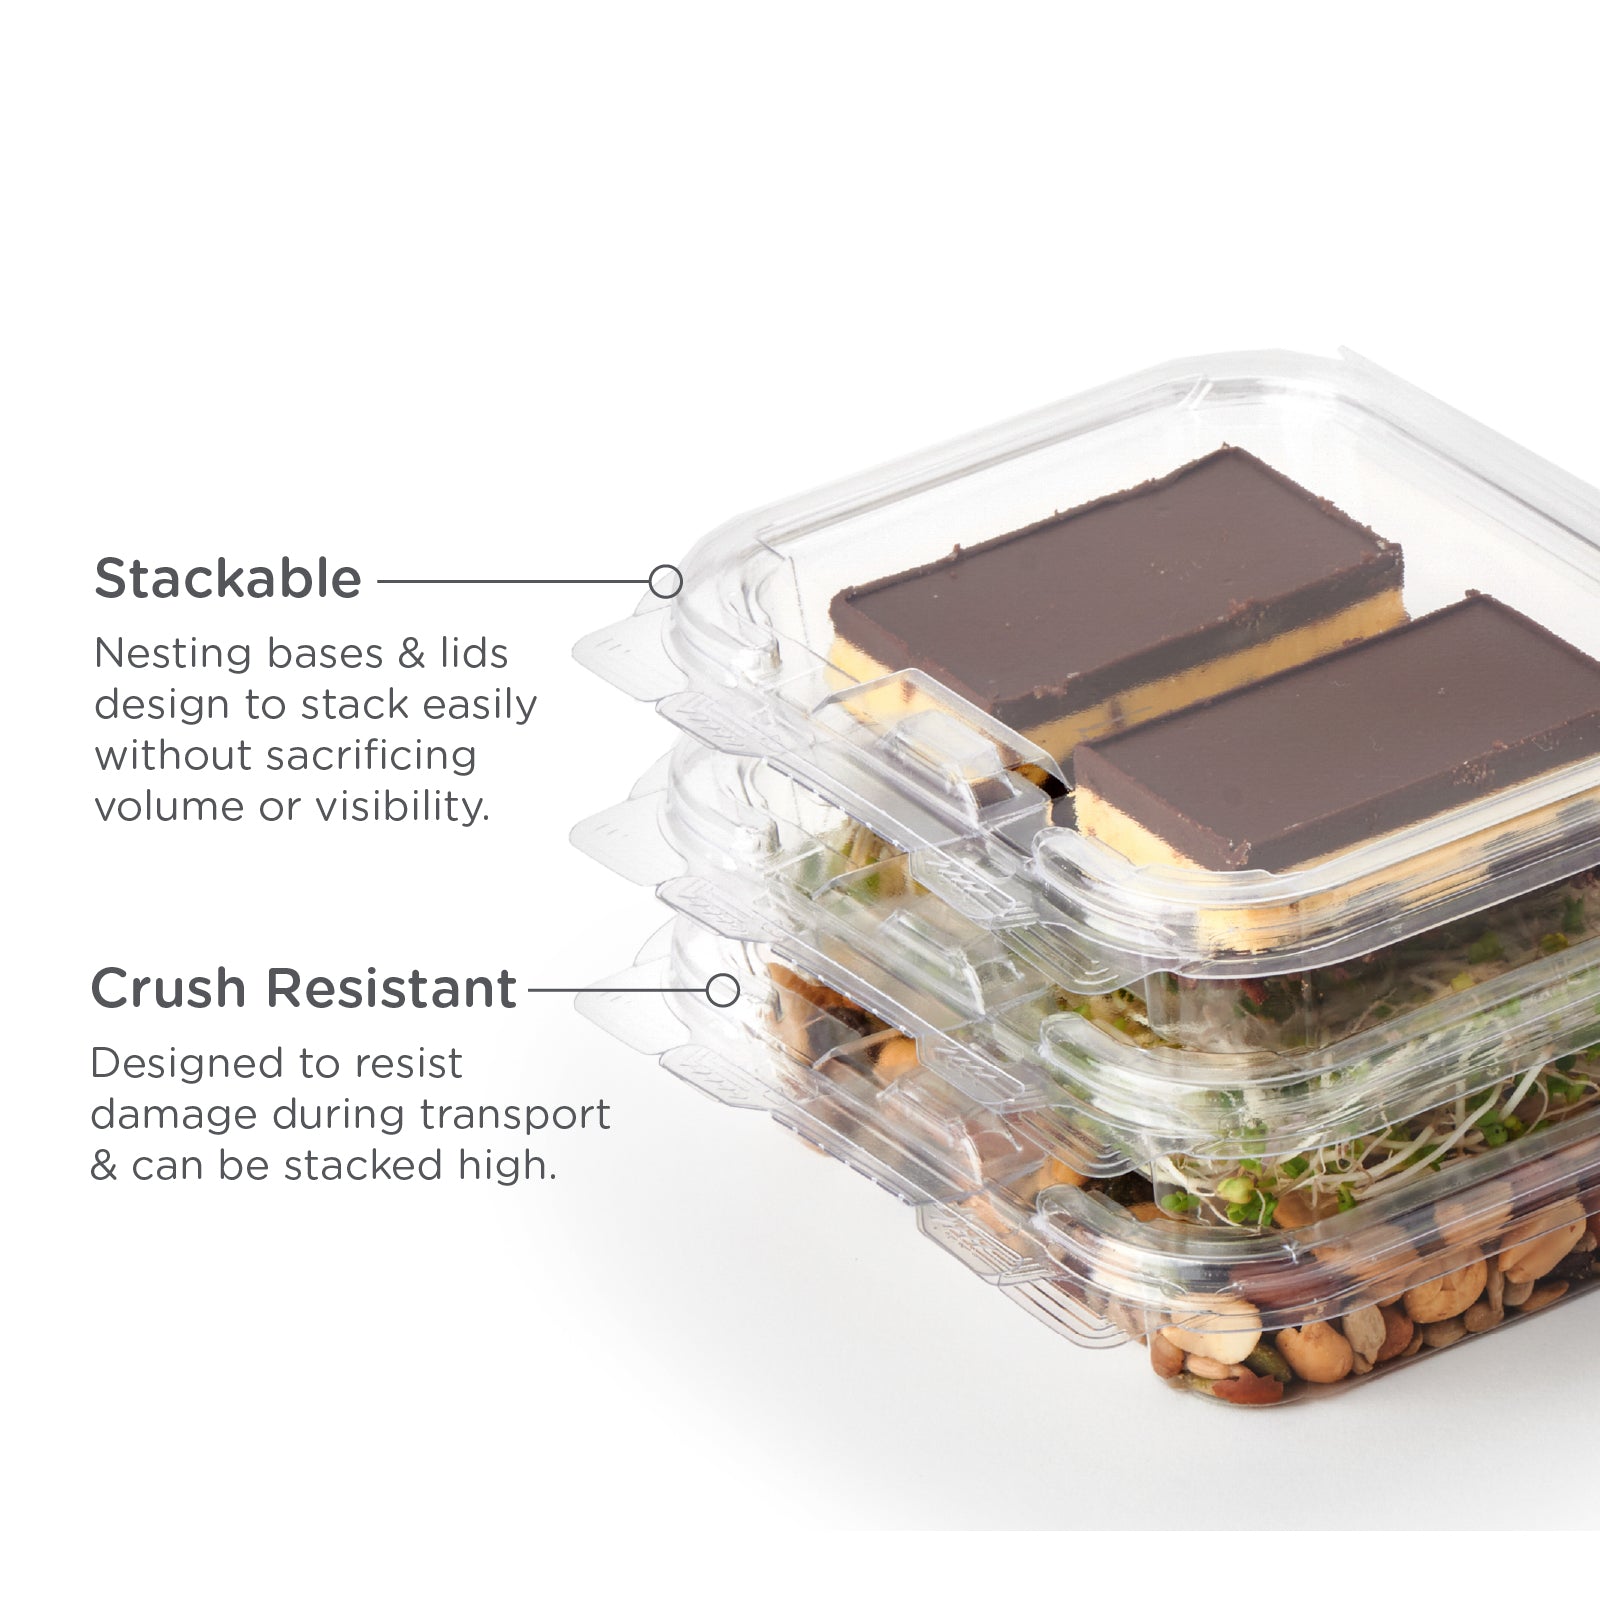 Take Out - To Go Containers - Page 1 - BioandChic